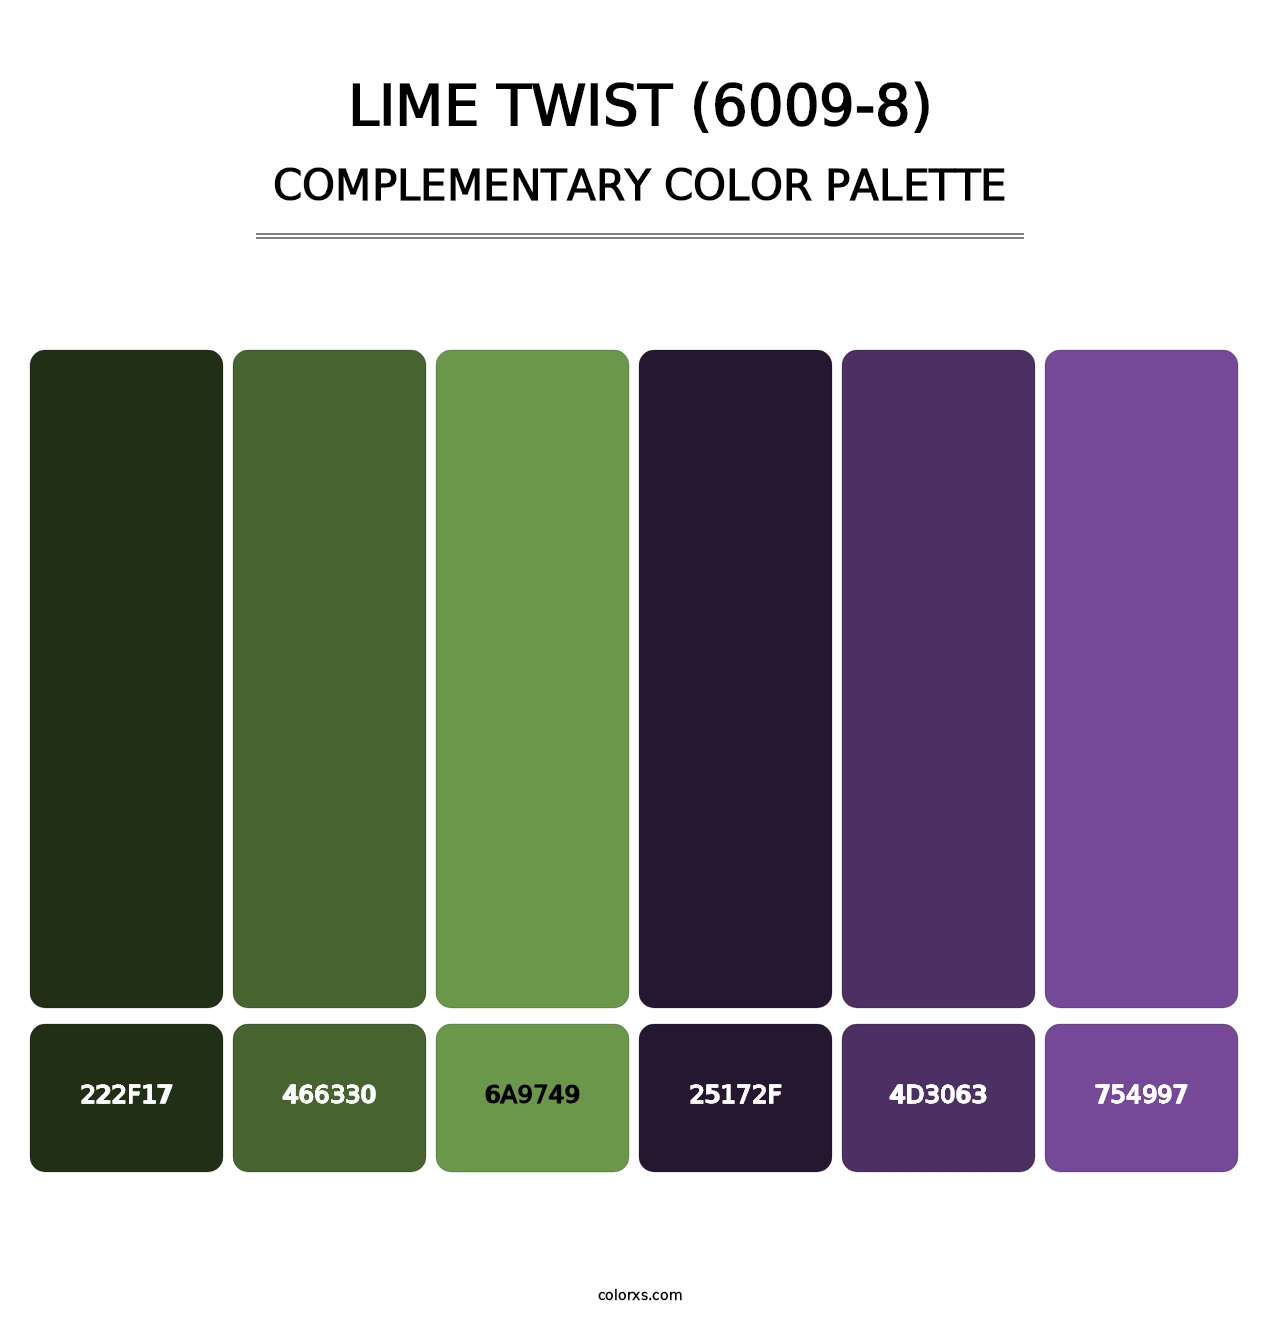 Lime Twist (6009-8) - Complementary Color Palette